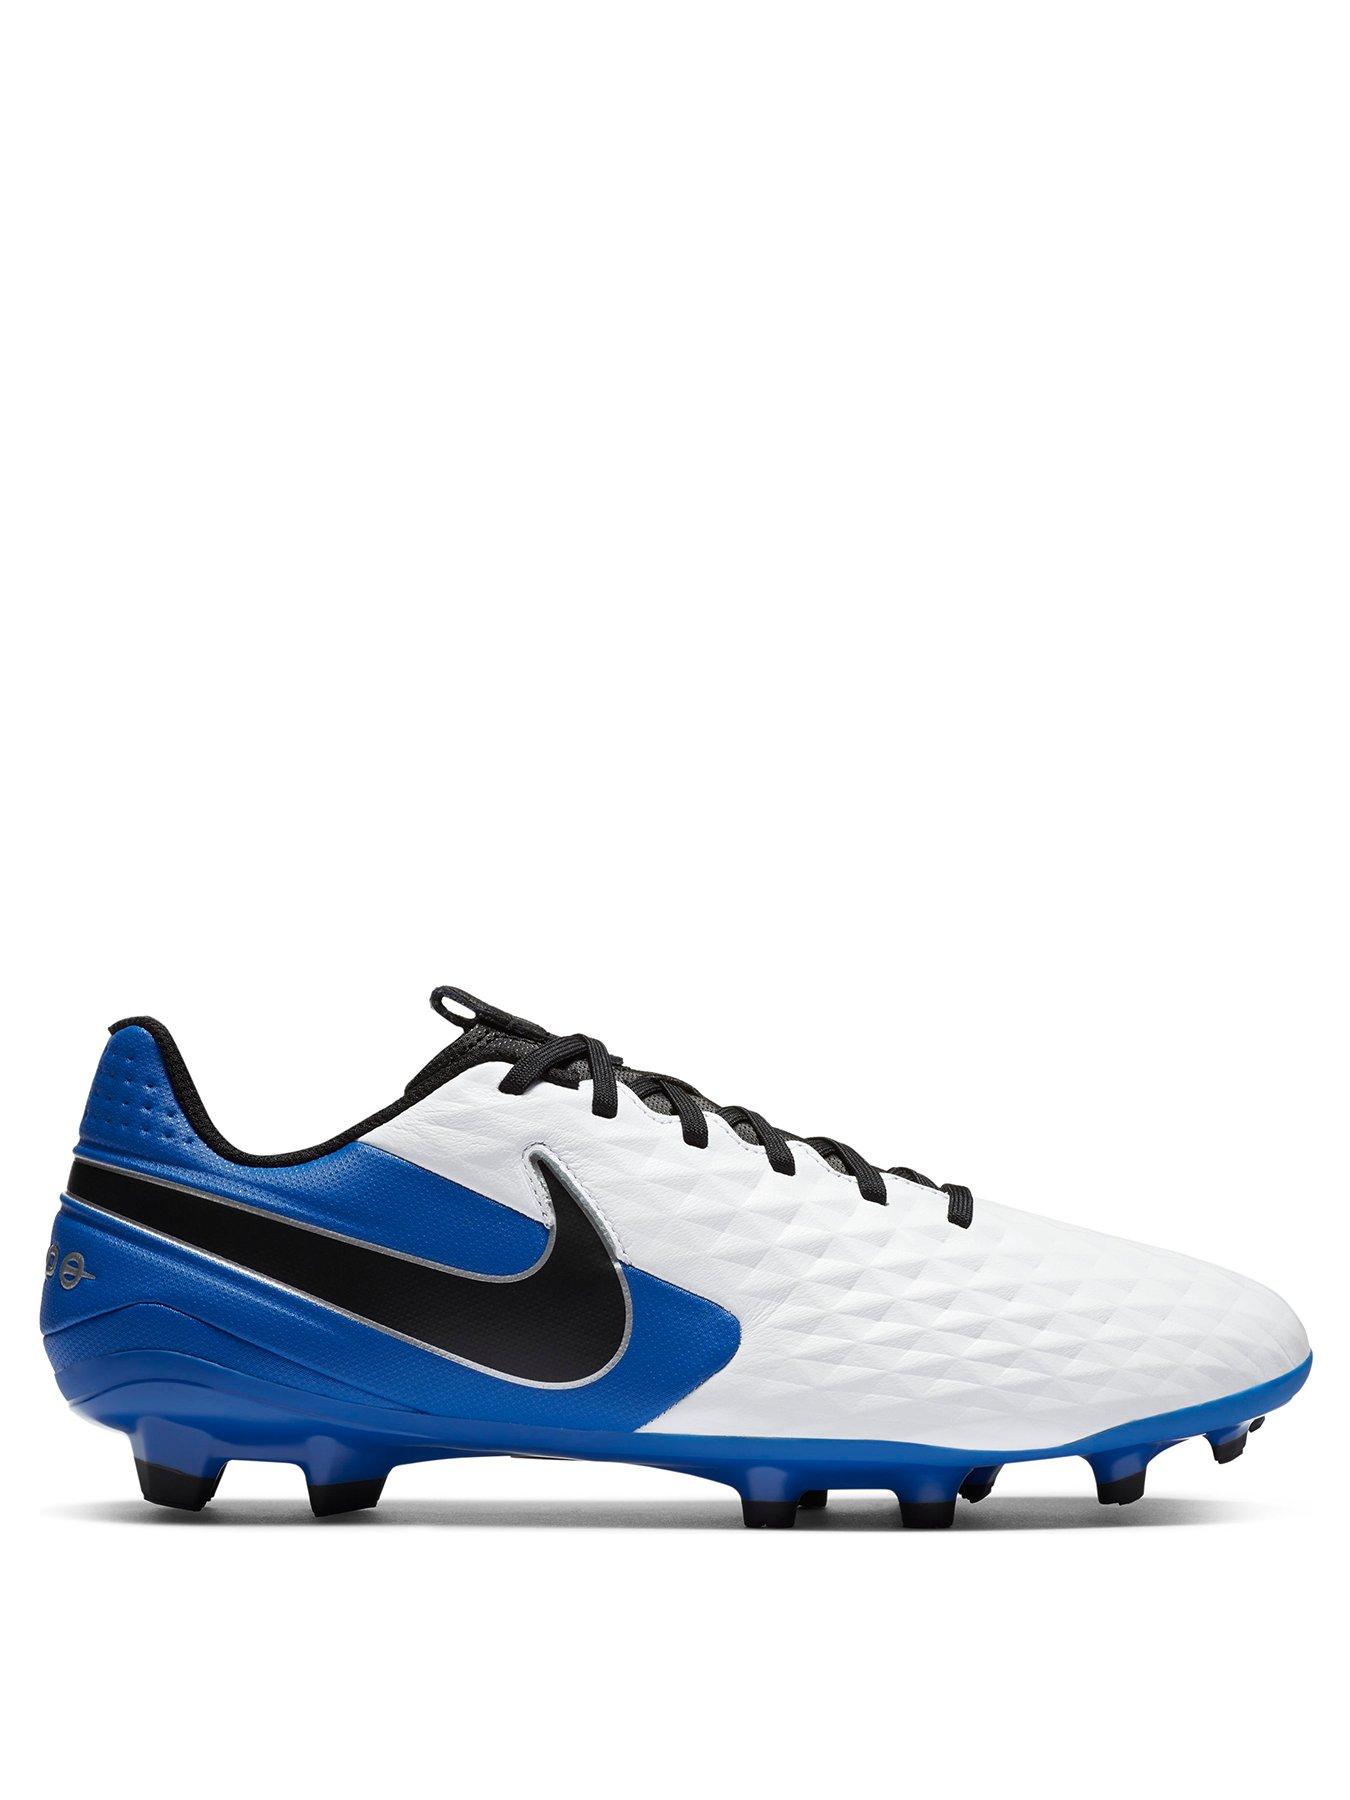 Firm Ground | Football boots | Mens 